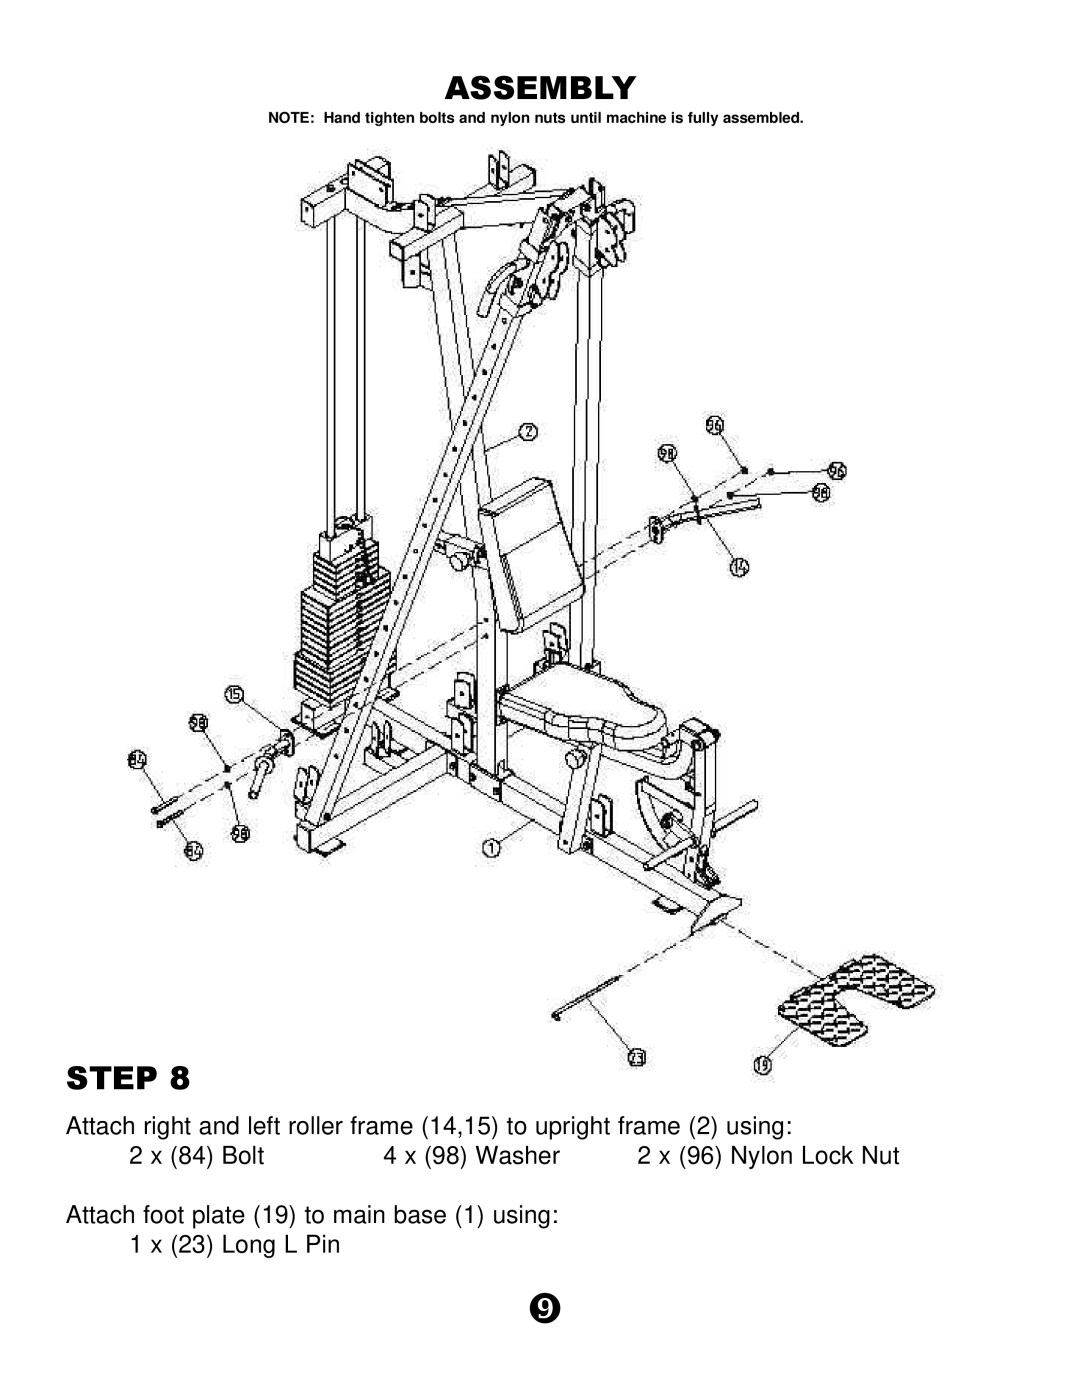 Keys Fitness KPS-CG Assembly, Step, Attach right and left roller frame 14,15 to upright frame 2 using, 2 x 84 Bolt 